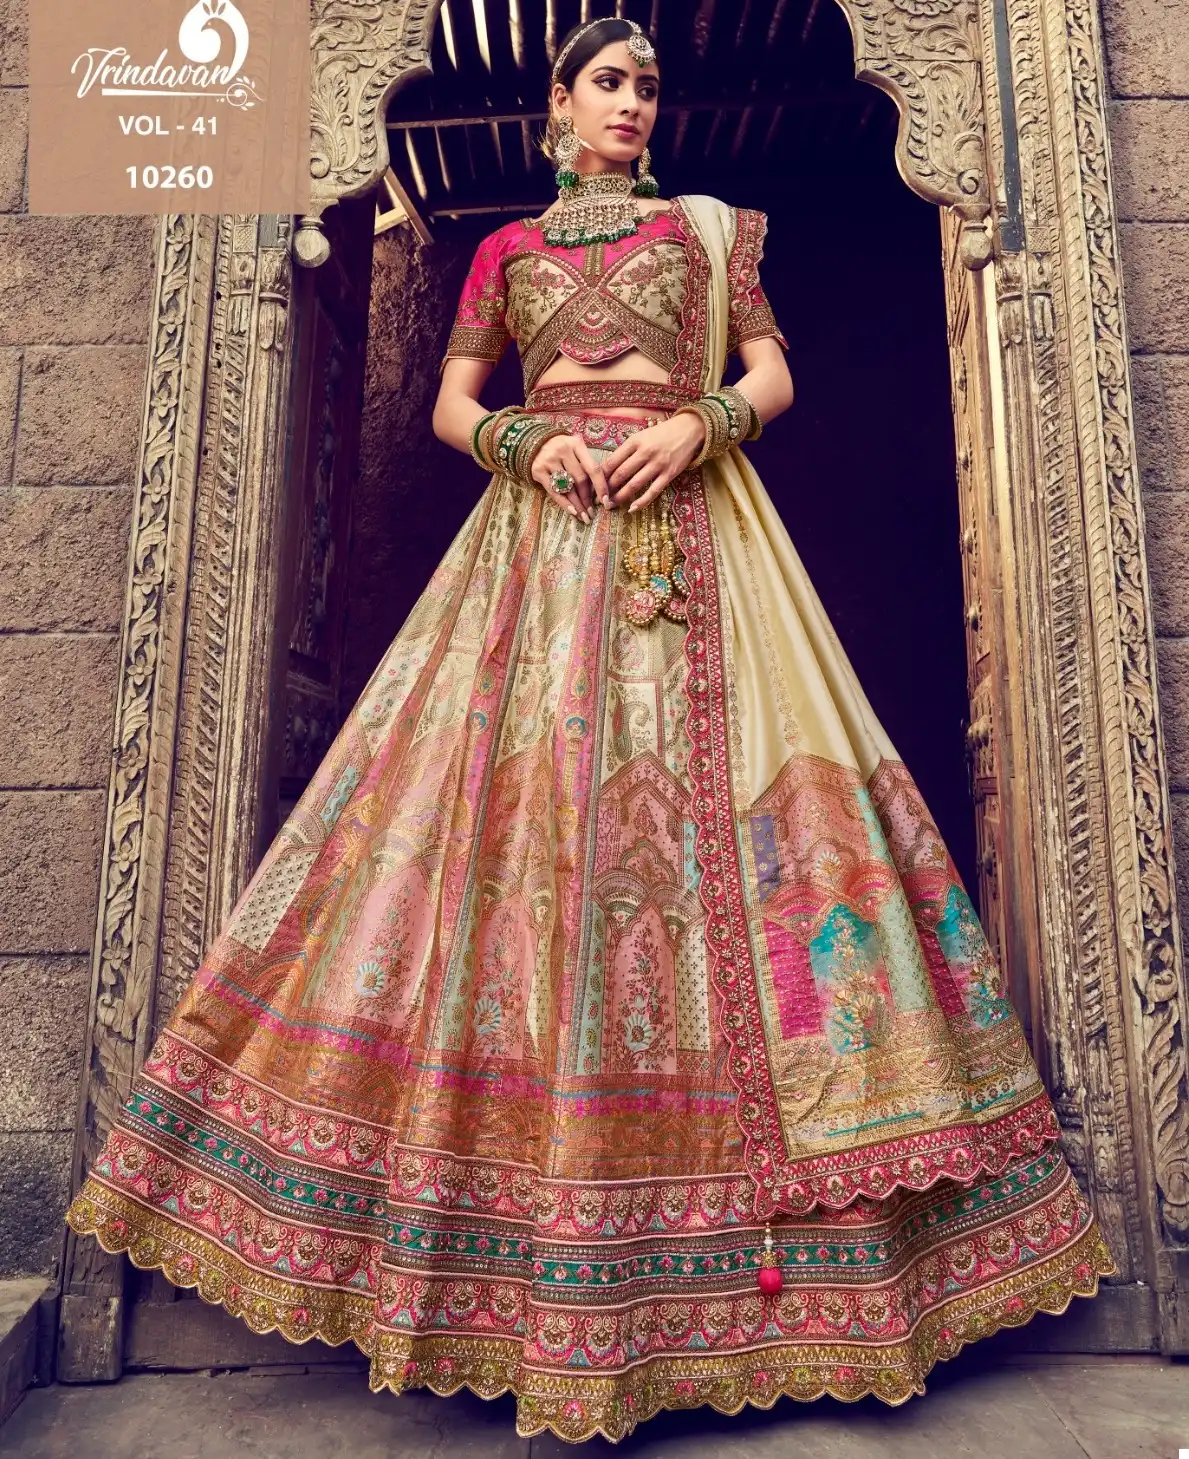 Stunning Wedding Lehengas Under Rs. 10,000 Every Bride-To-Be Will Fall In  Love With | Indian wedding outfit, Wedding outfit, Red lehenga